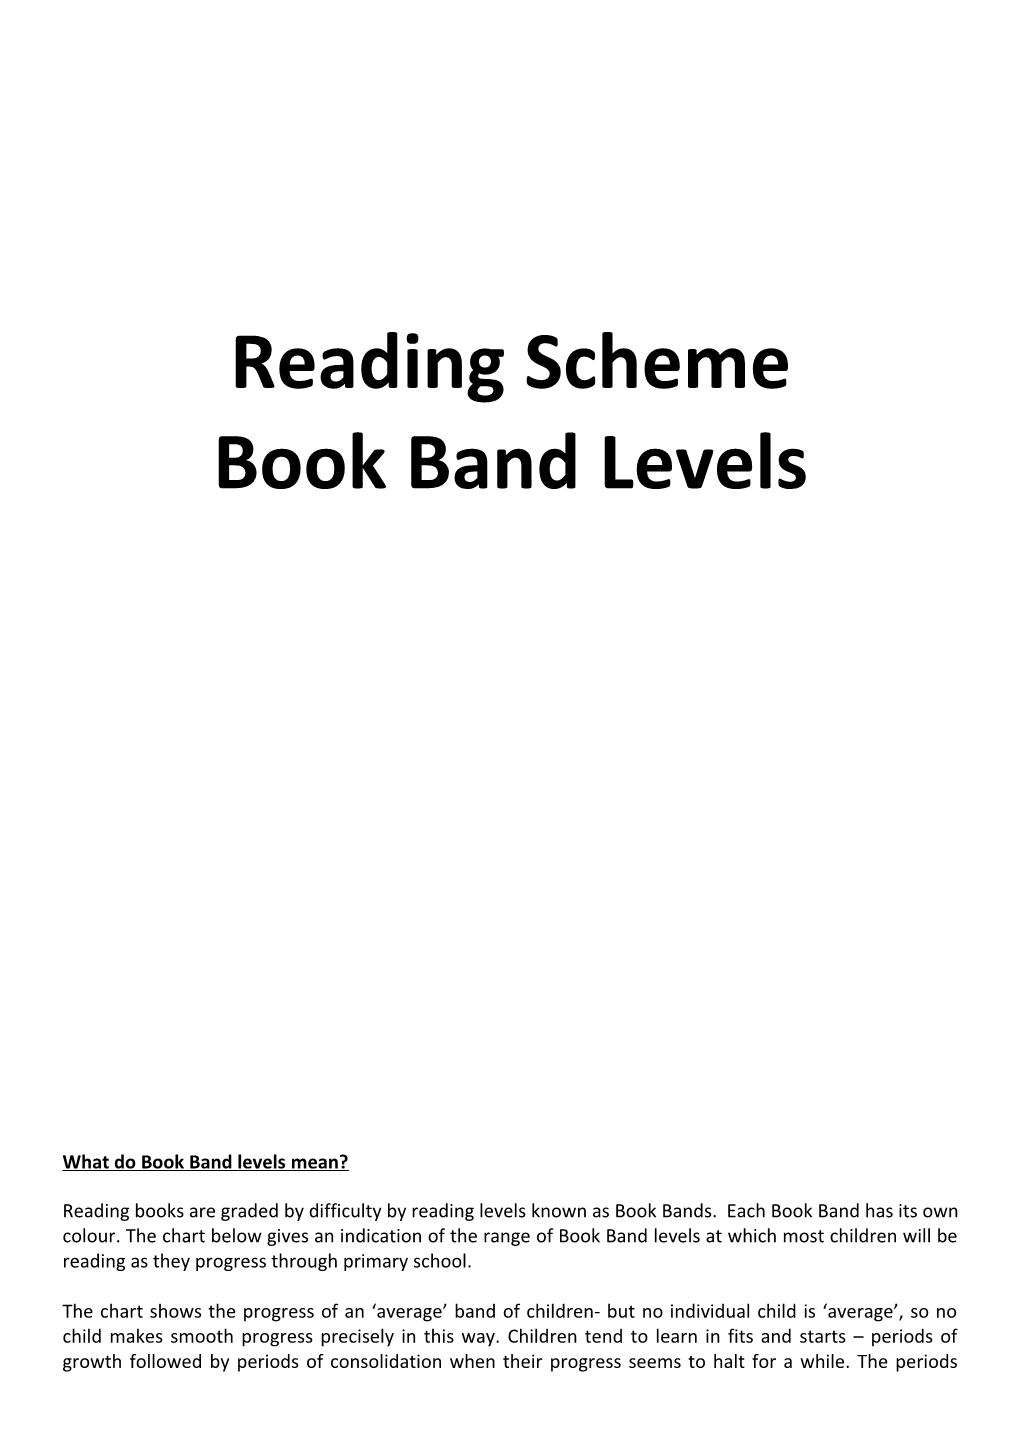 What Do Book Band Levels Mean